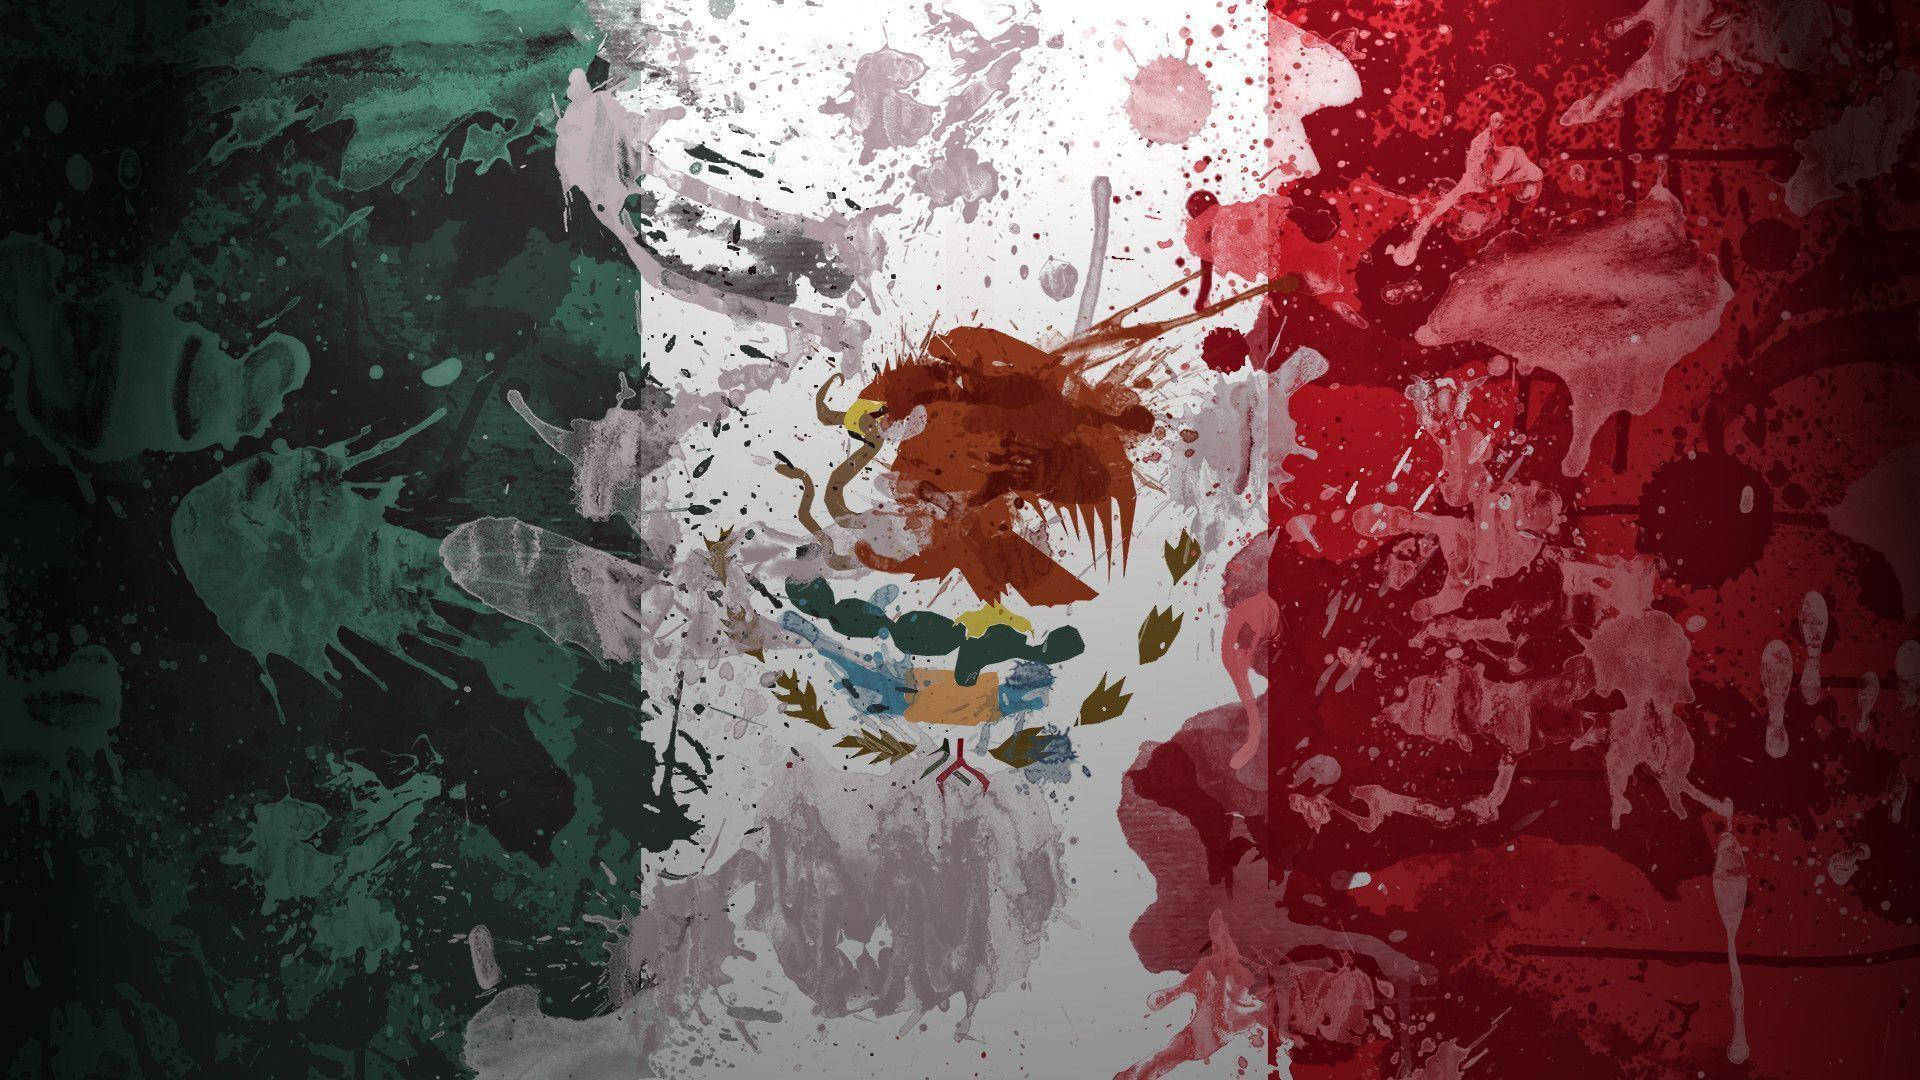 Free Mexico Flag Wallpaper Downloads, Mexico Flag Wallpaper for FREE